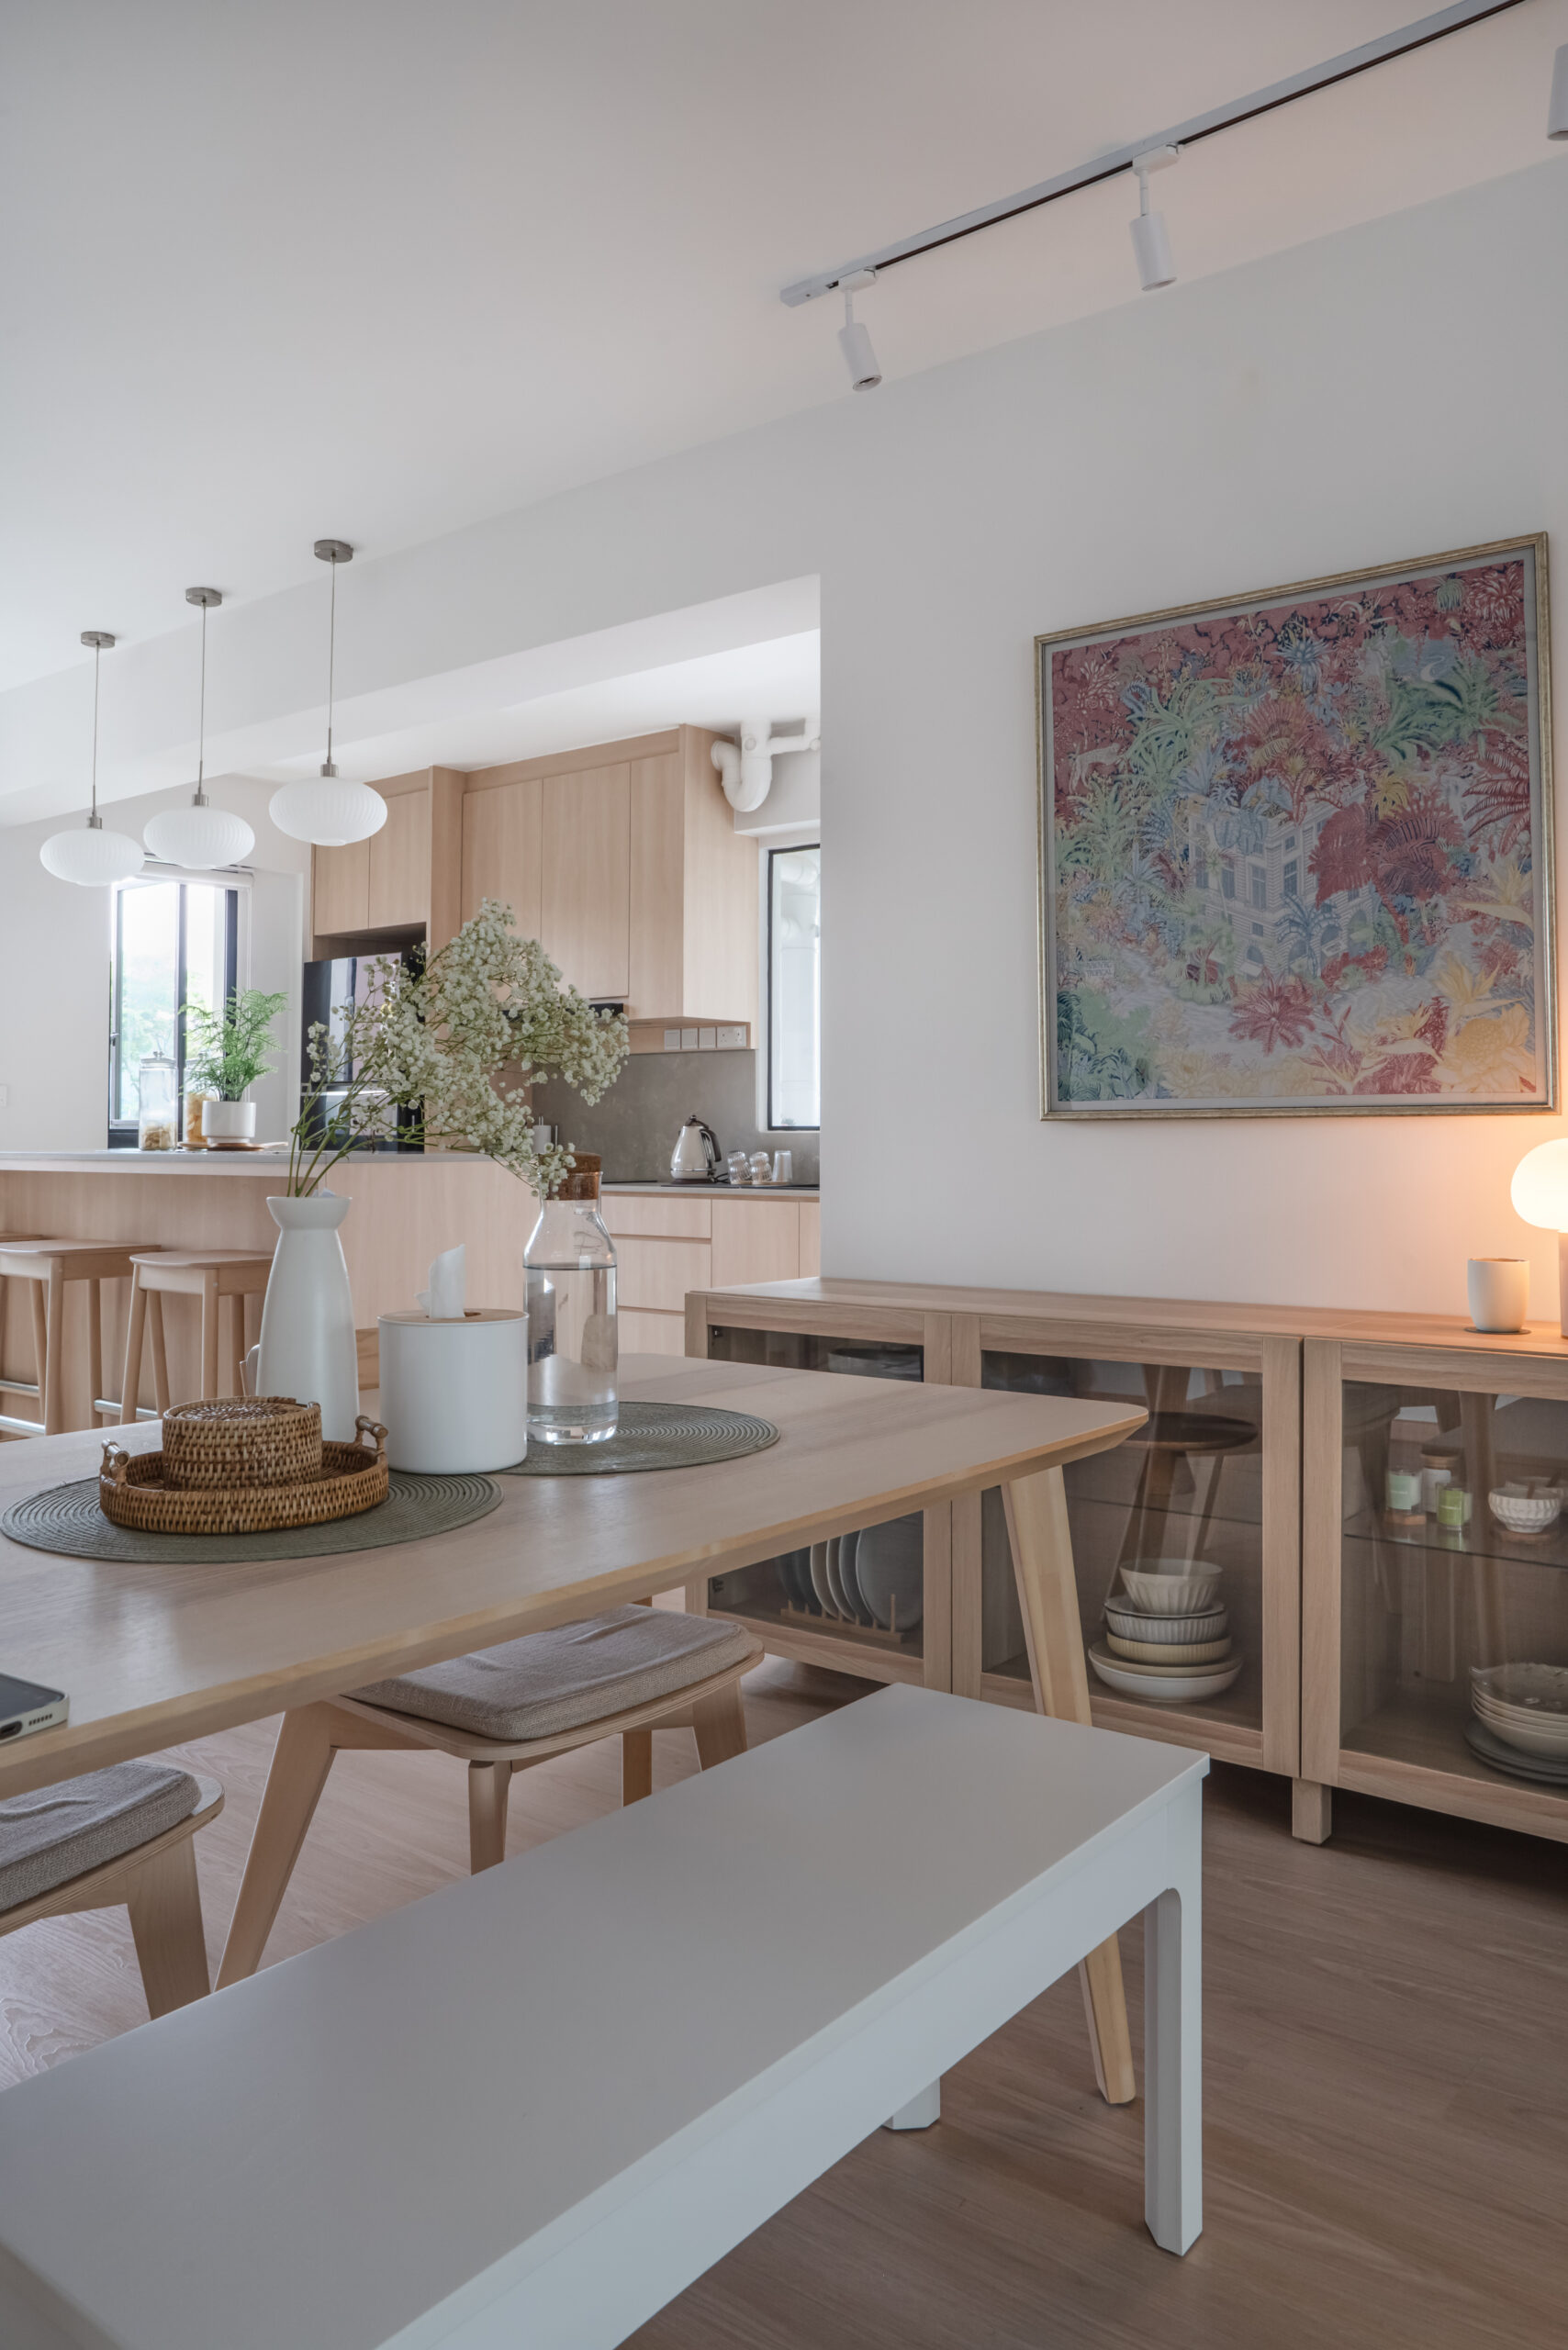 A stunning Singaporean interior design home featuring a modern Scandinavian-inspired kitchen with a beautiful blend of wood and white elements. The kitchen showcases sleek wooden cabinets, a pristine white countertop, and stylish pendant lights. Additionally, the dining table is strategically placed at the center of the living room, creating a harmonious and open layout. The light-filled space exudes a cozy and inviting ambiance, combining minimalist aesthetics with warm, natural textures for a truly captivating design.